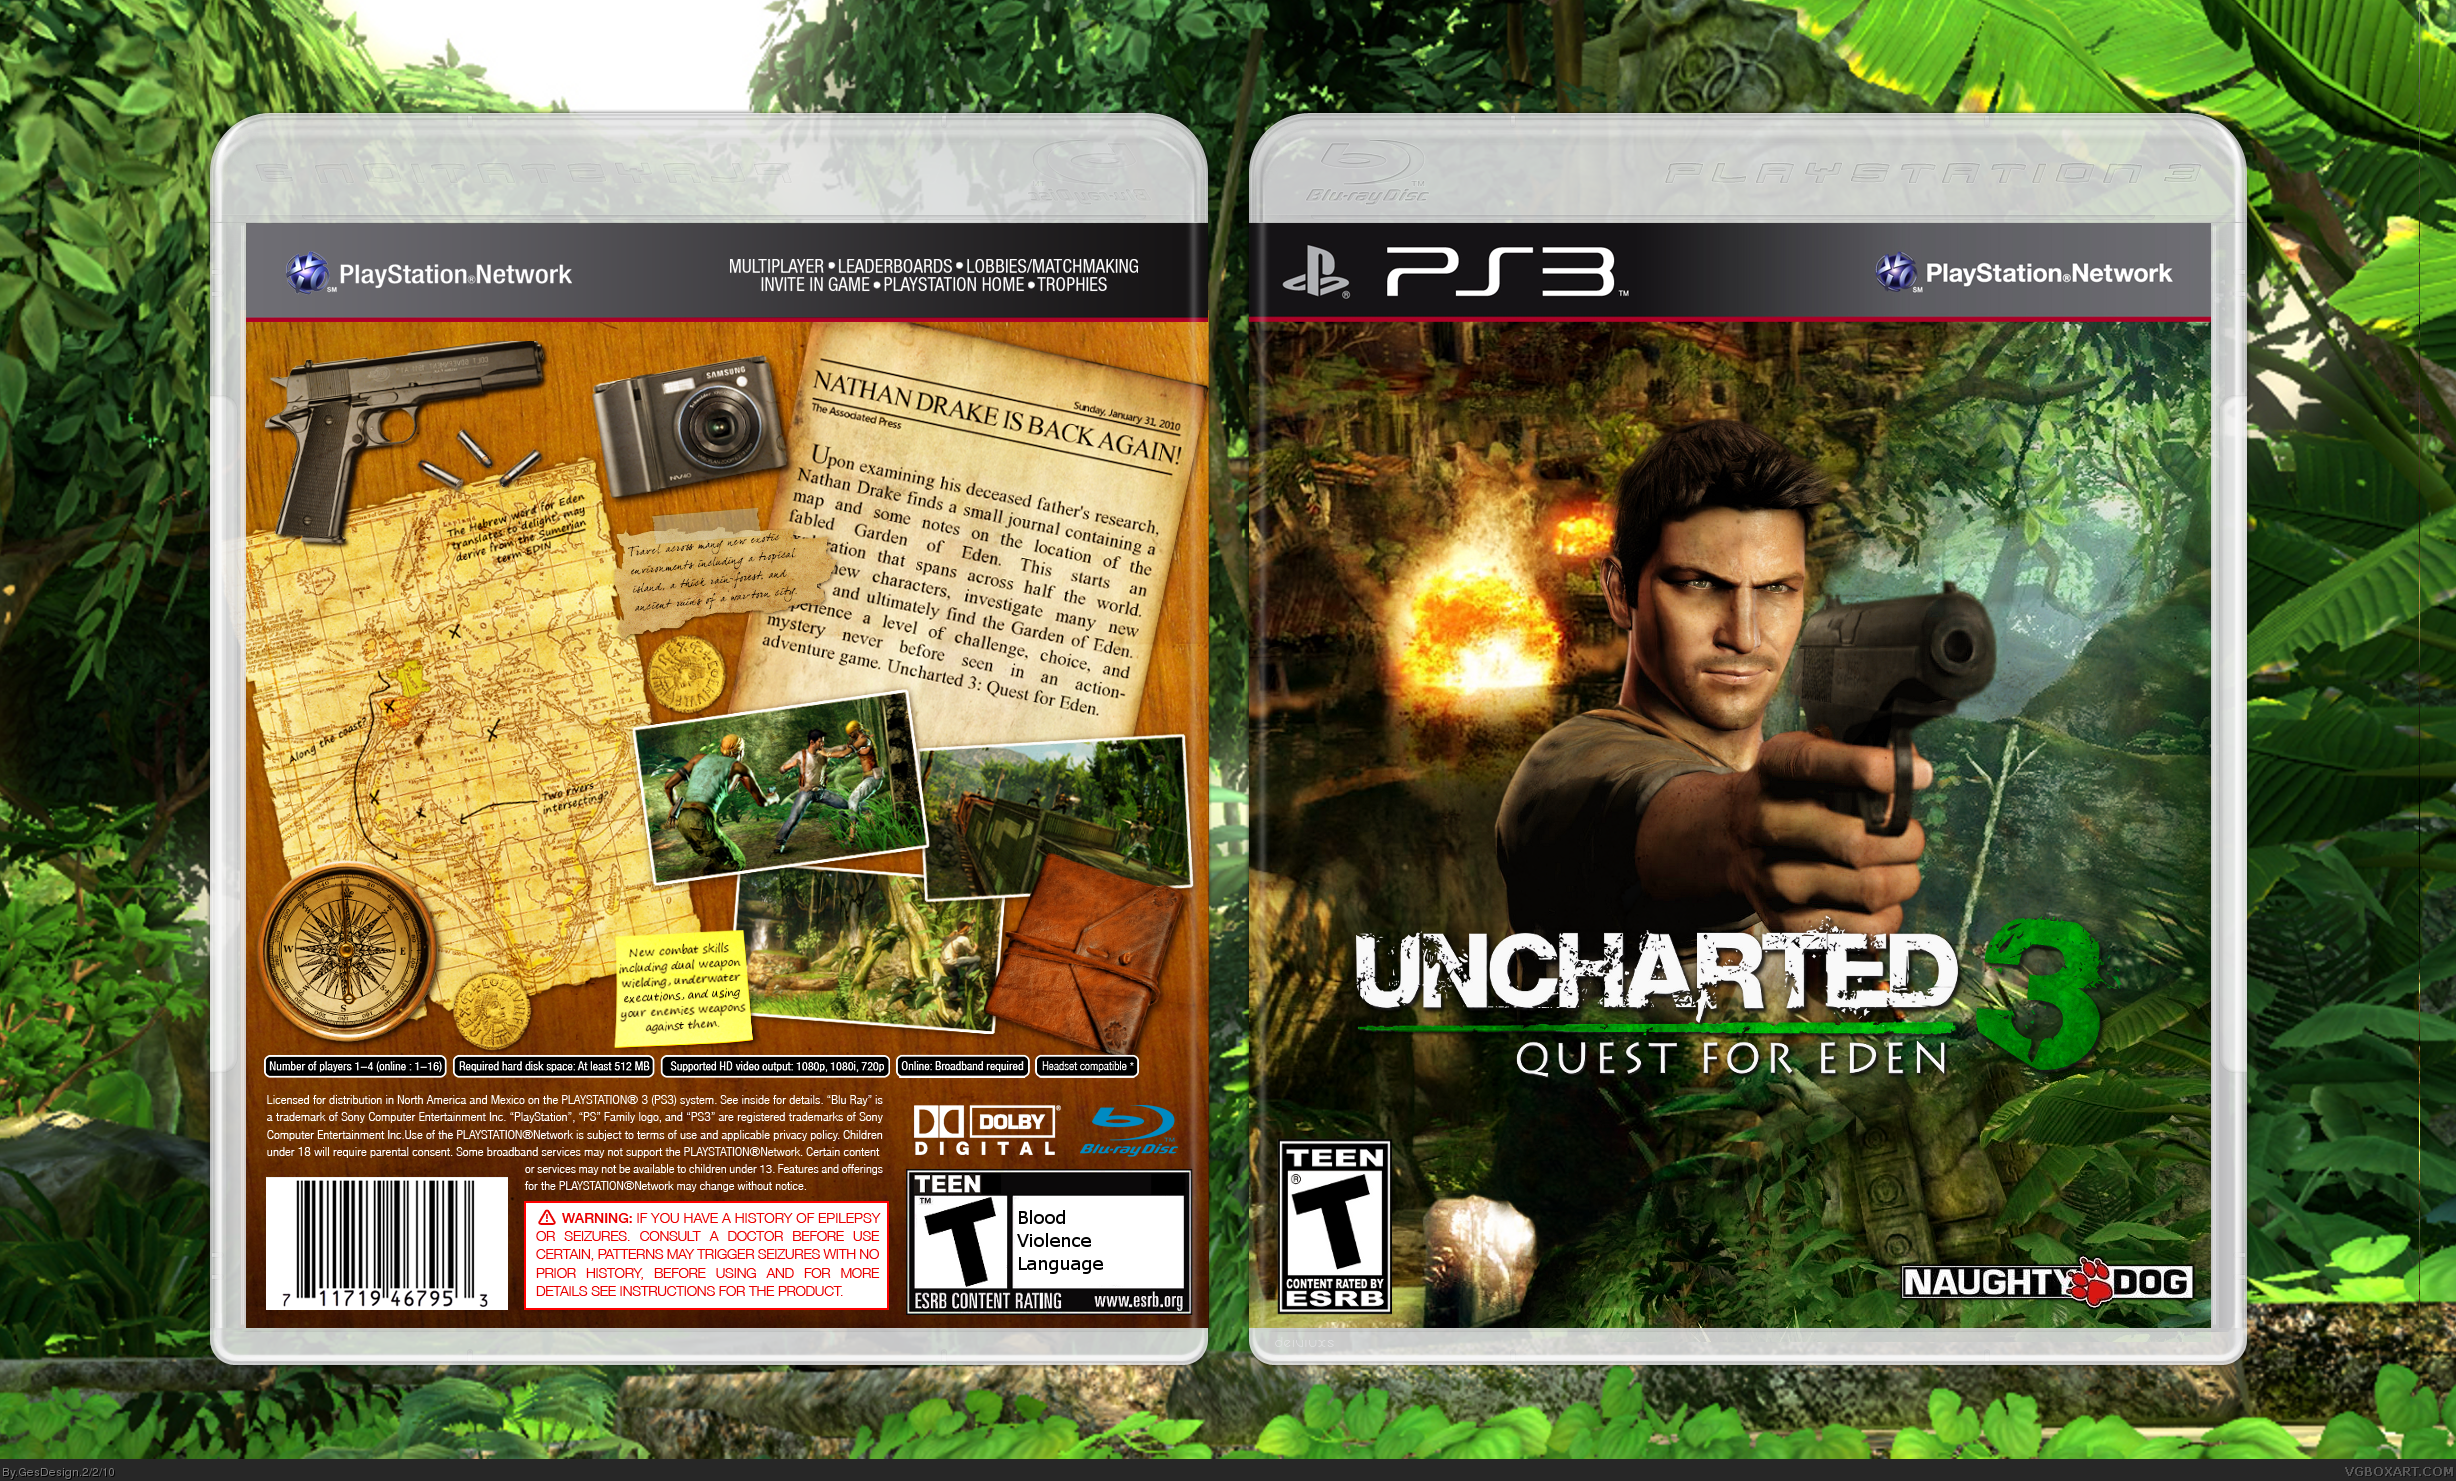 Uncharted 3: Quest for Eden box cover